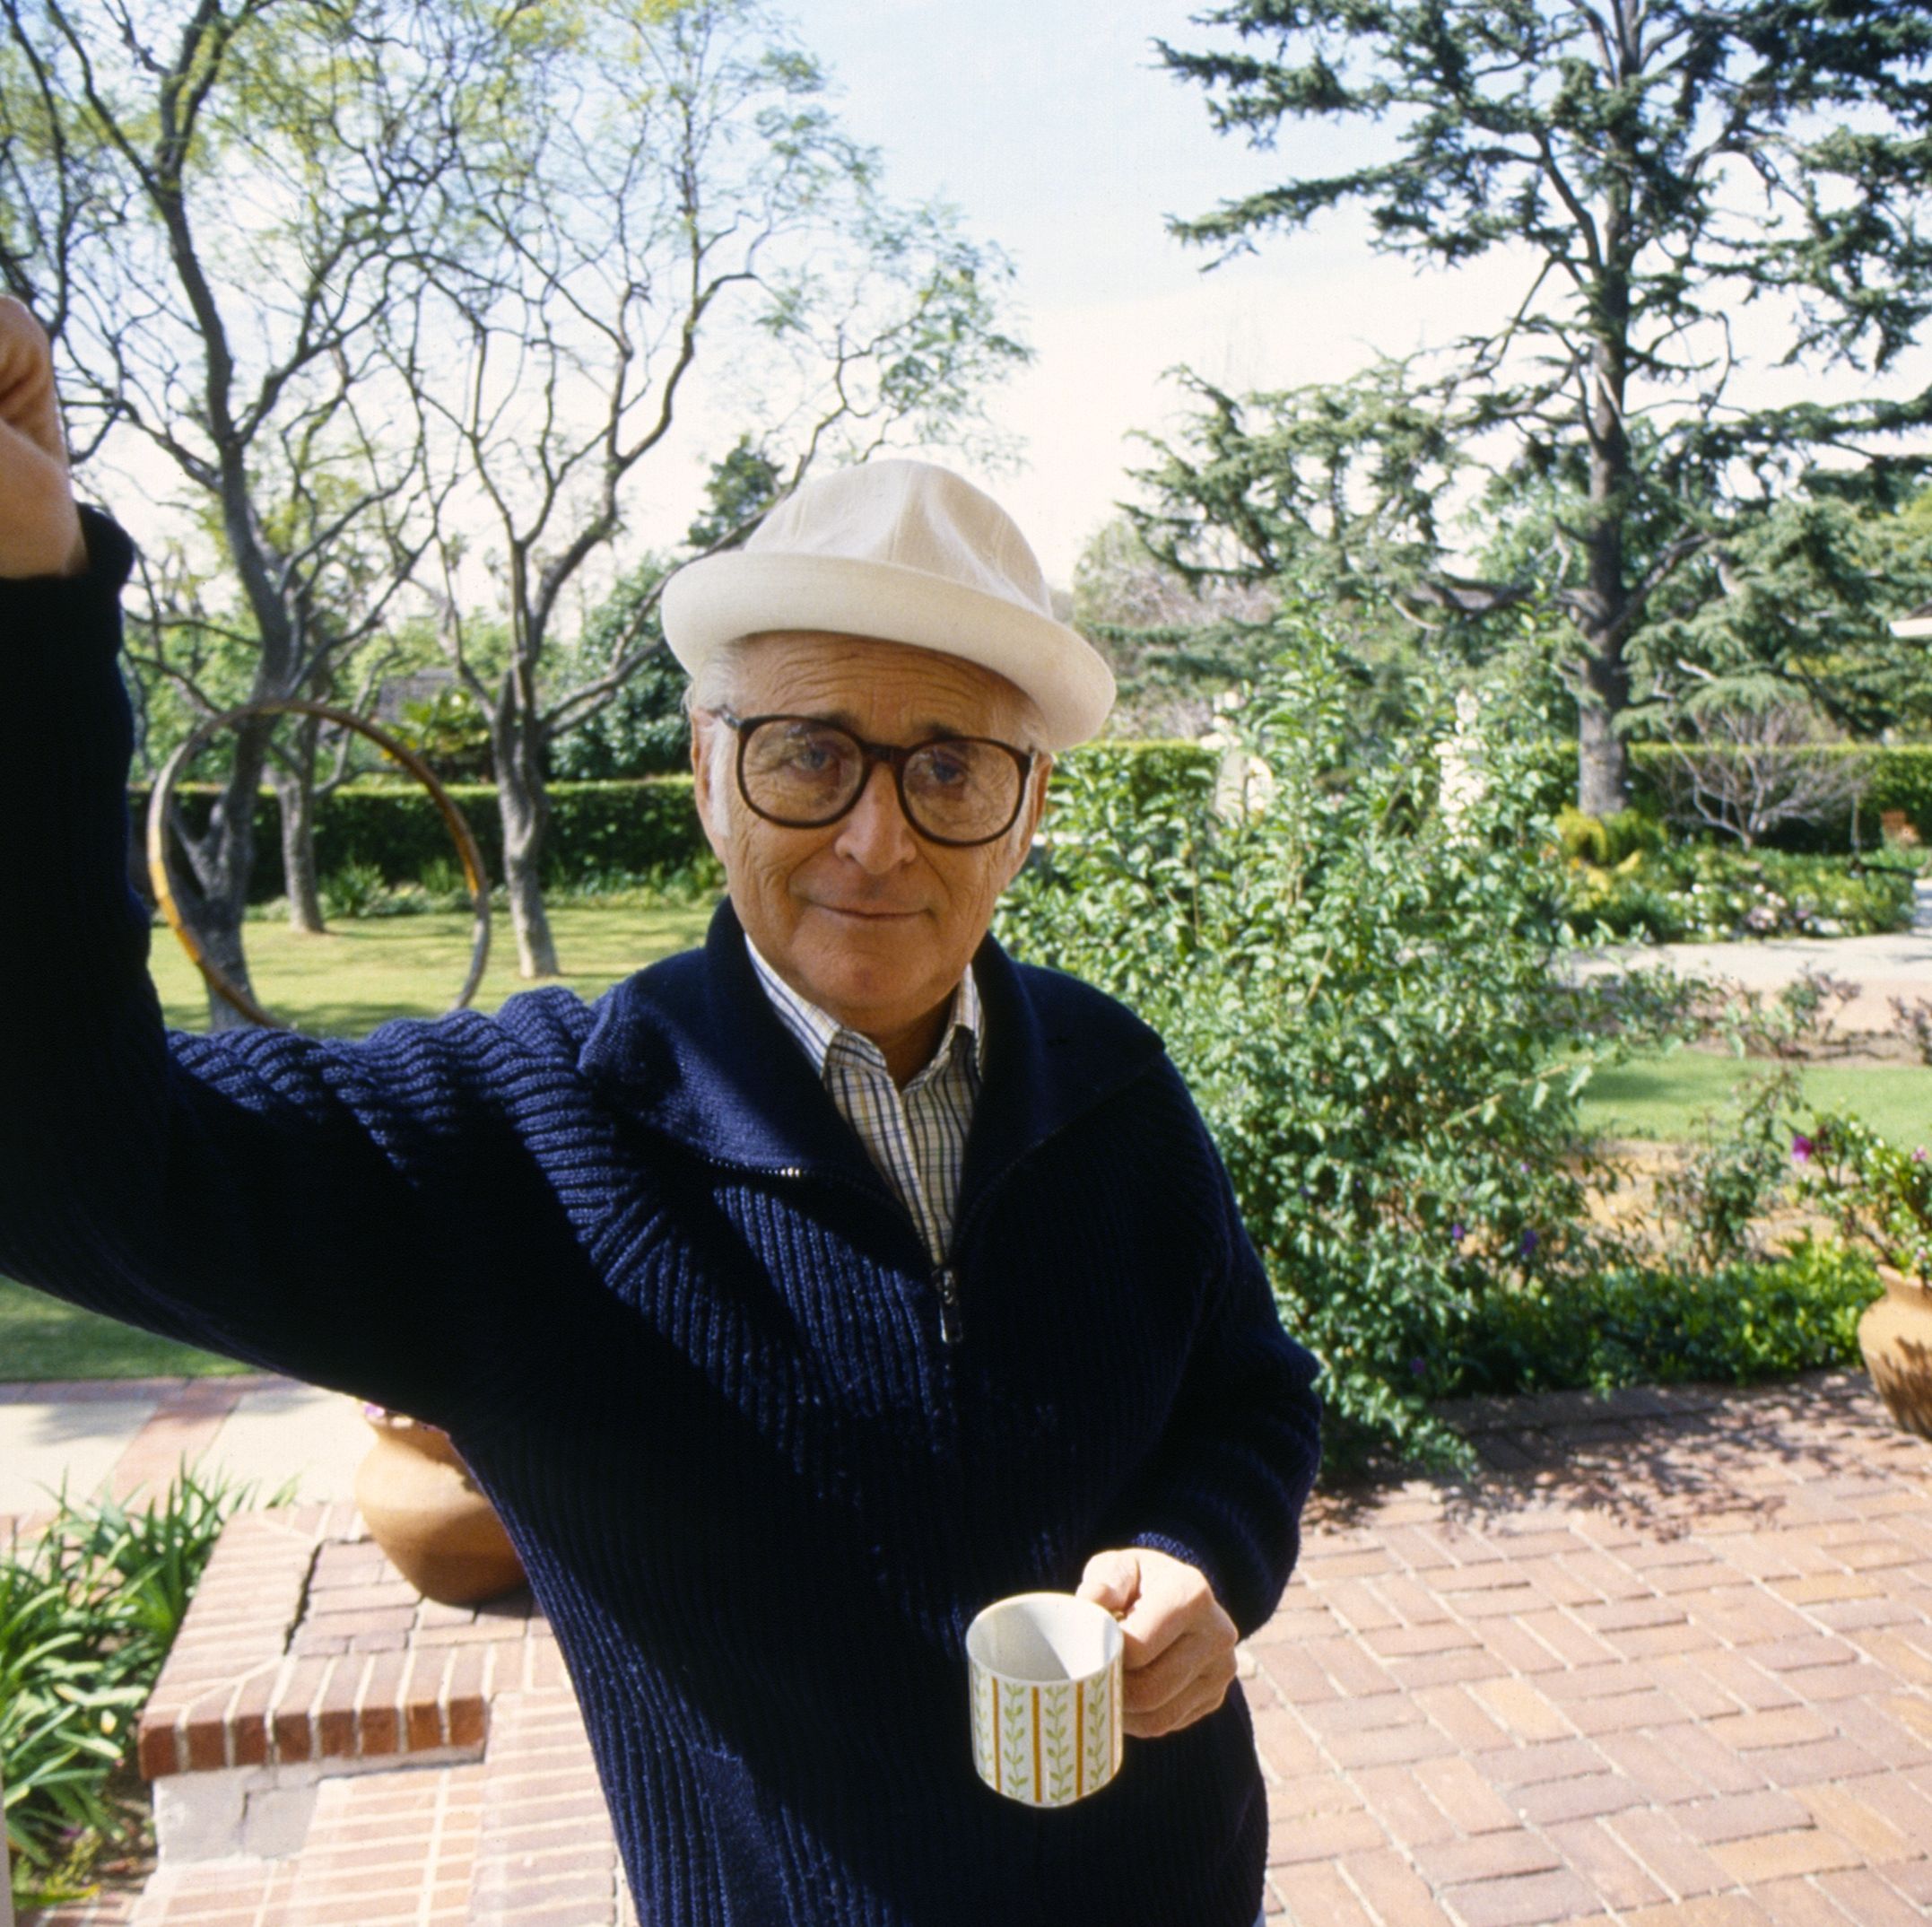 The World According to Norman Lear